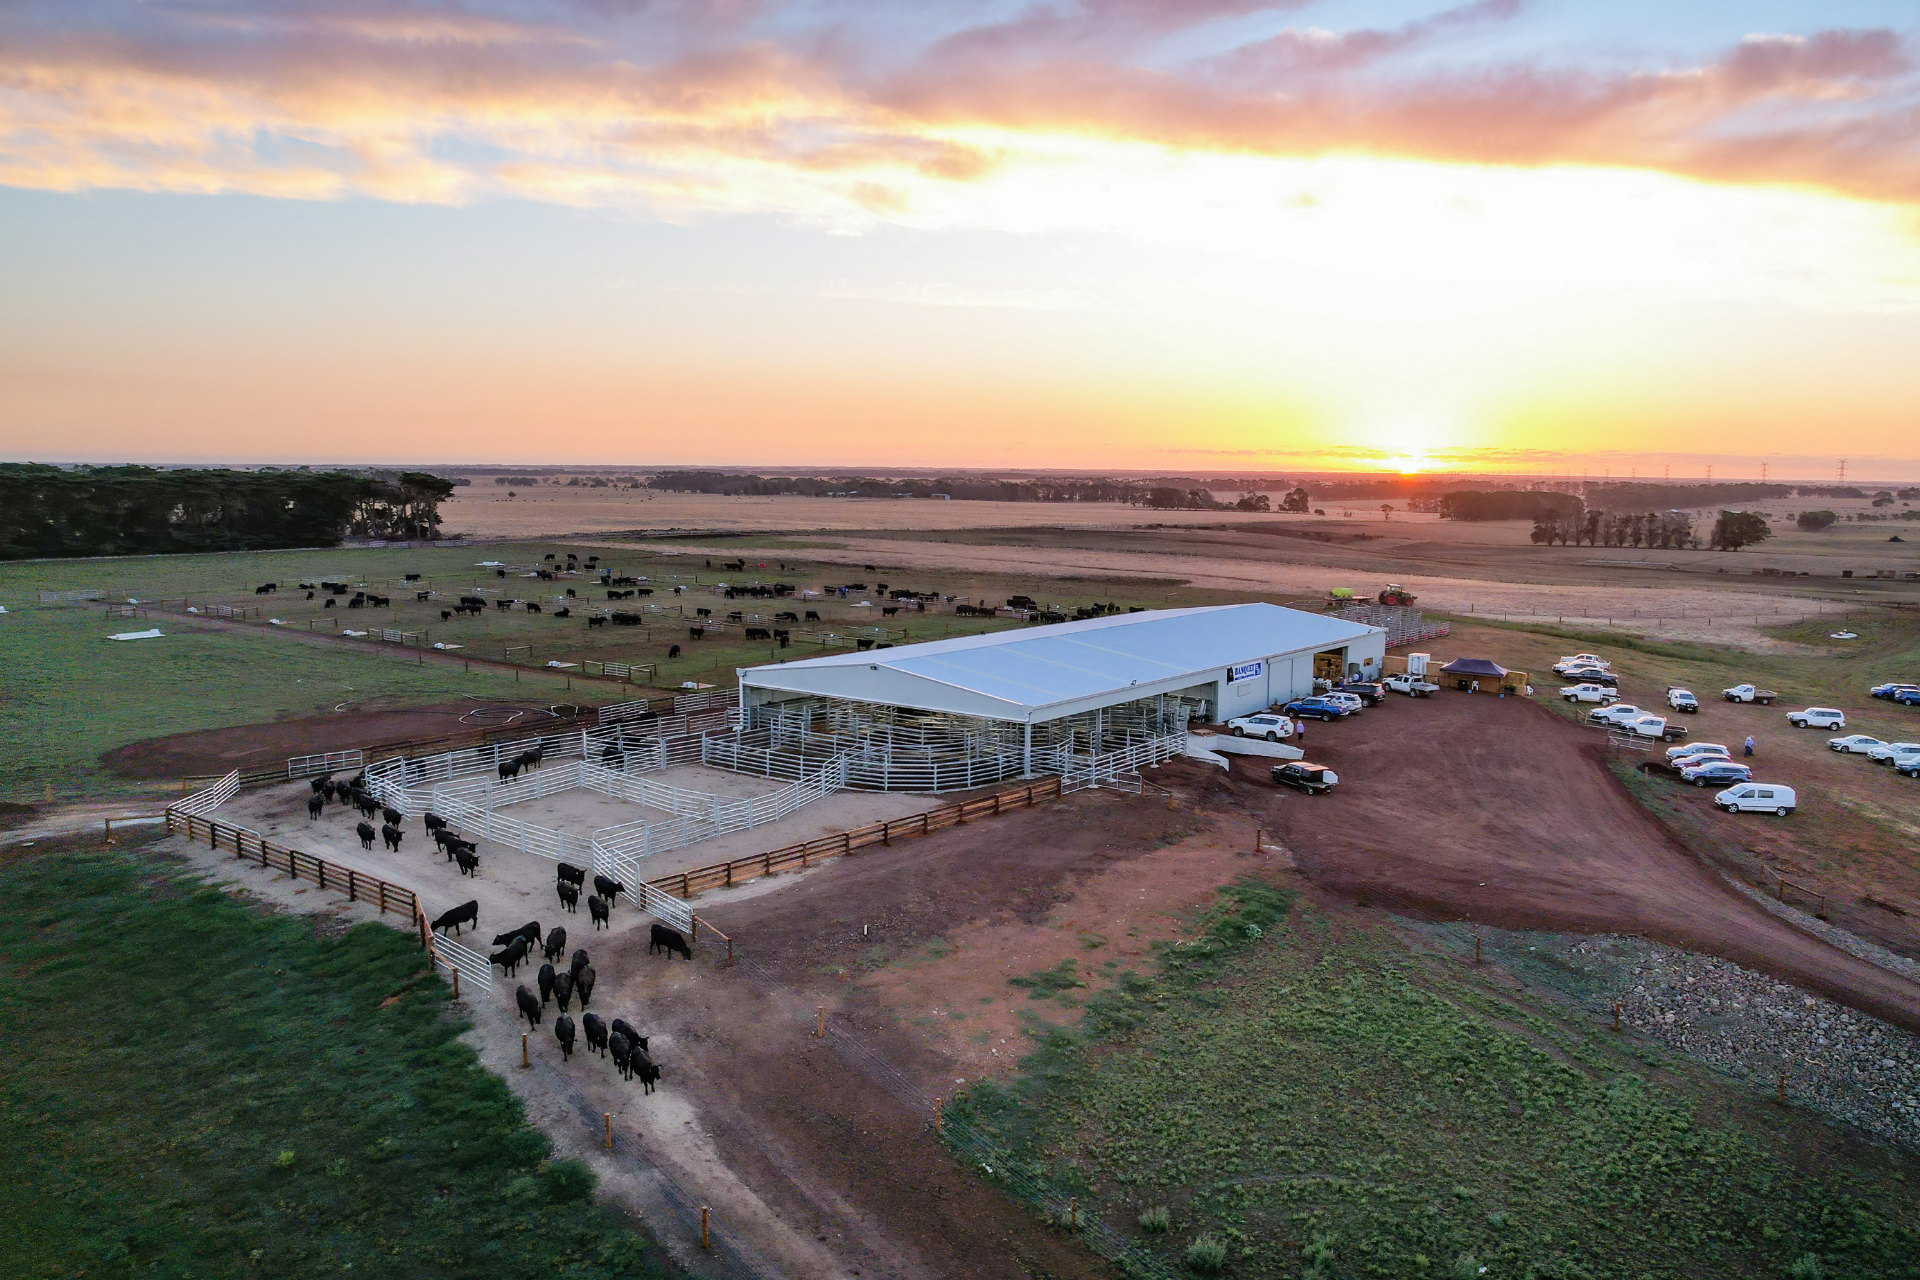 bull sale arena and cattle yard cover